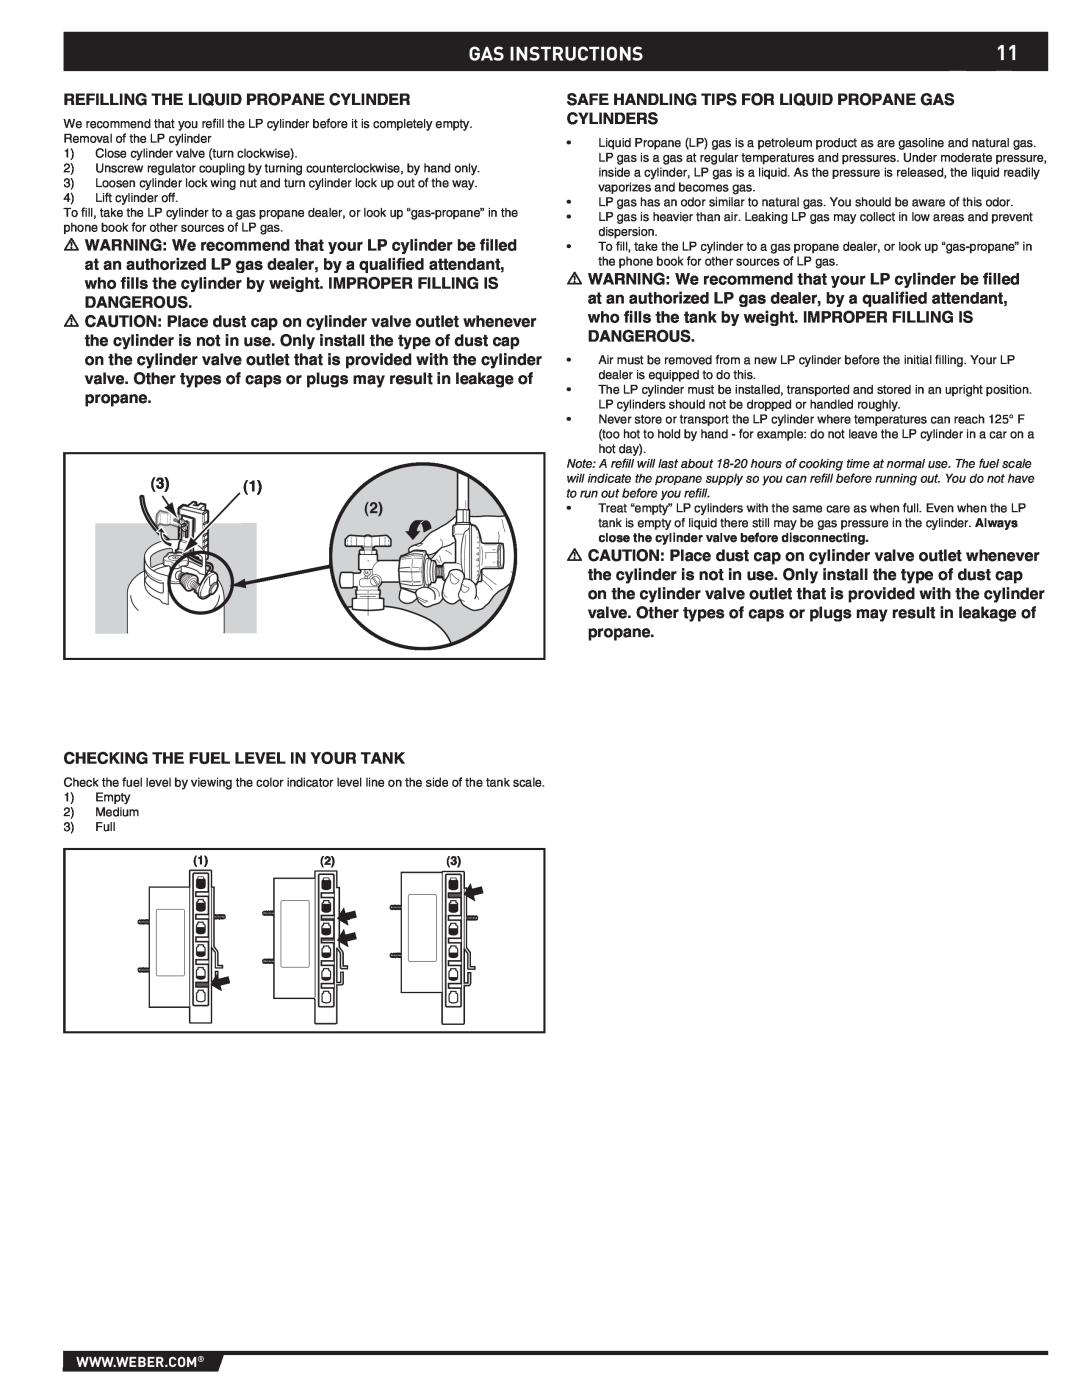 Weber 43176 manual Gas Instructions, Refilling The Liquid Propane Cylinder 